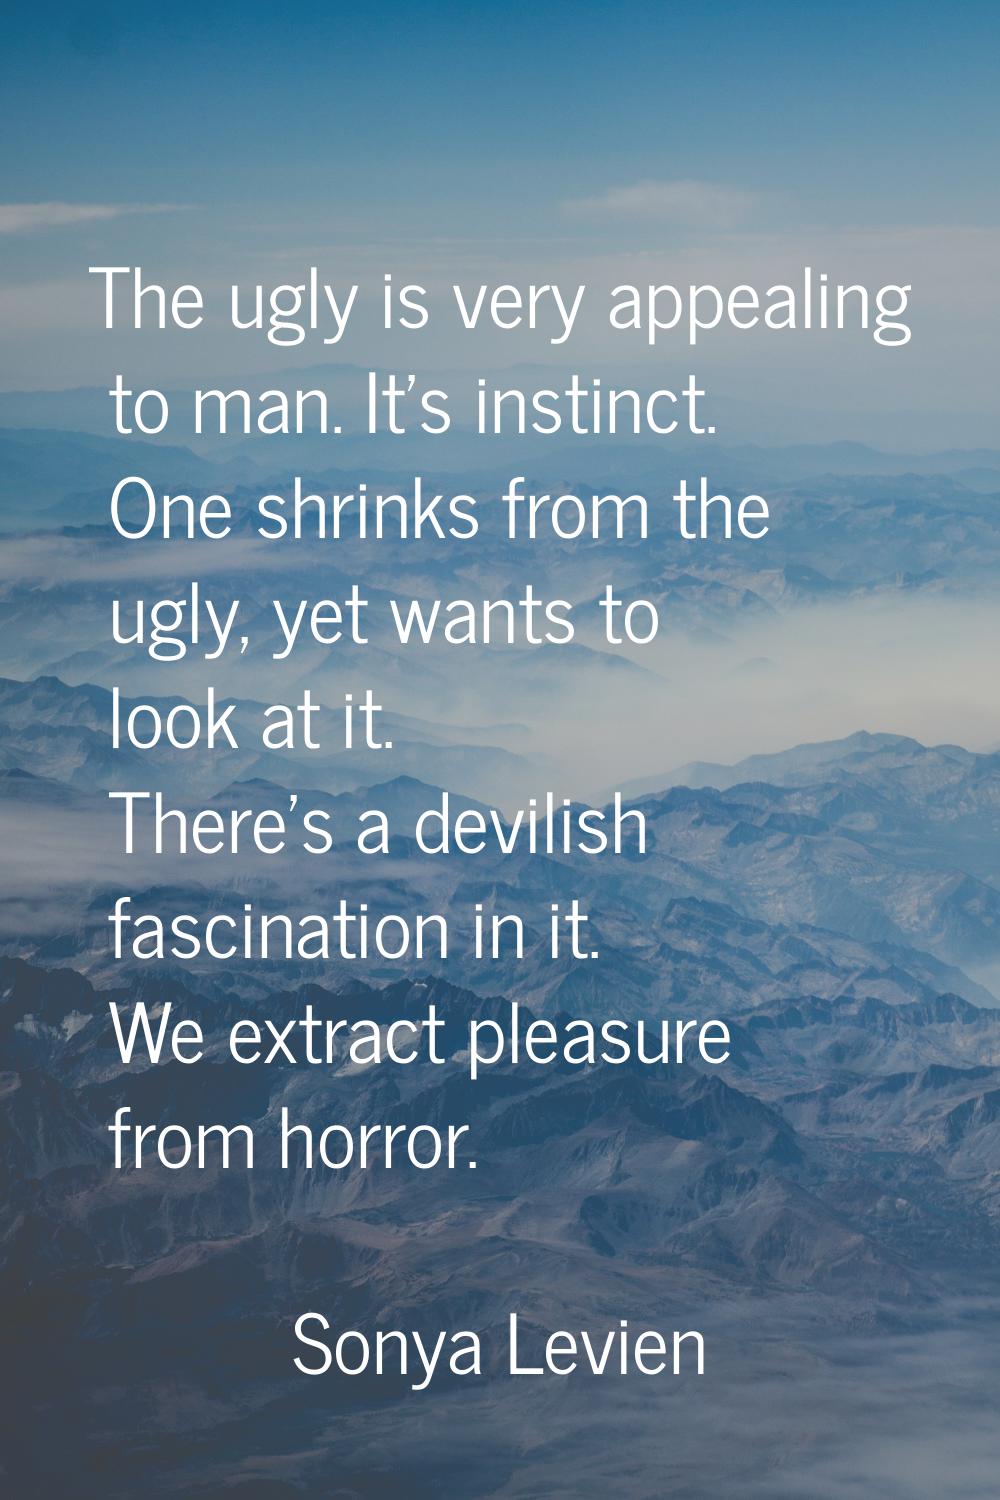 The ugly is very appealing to man. It's instinct. One shrinks from the ugly, yet wants to look at i